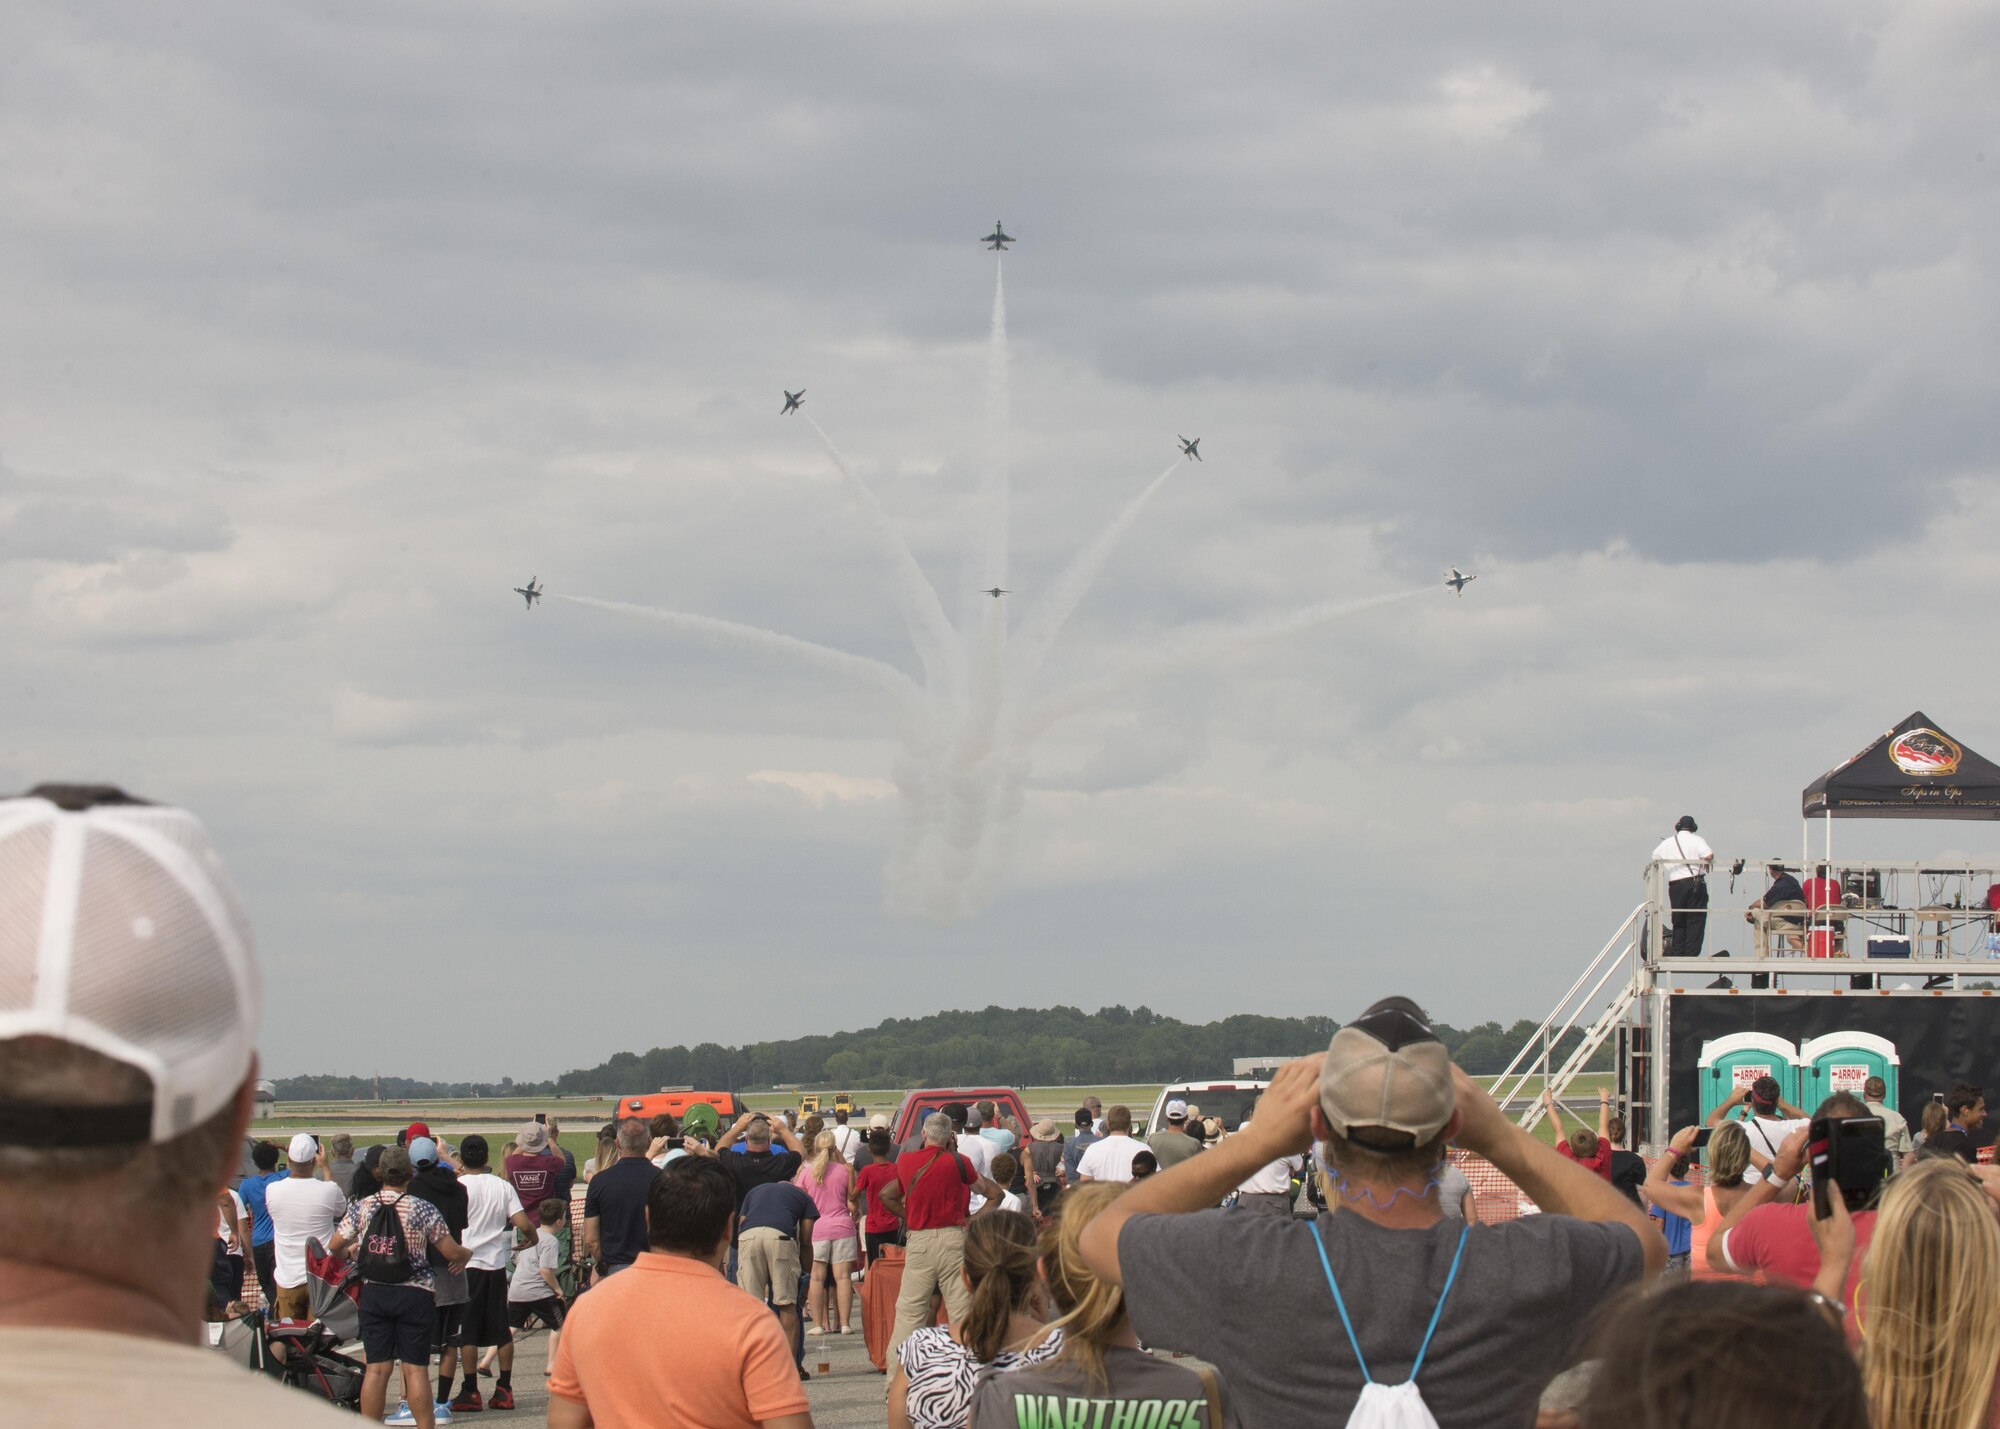 Team Dover guests watch as the Thunderbirds perform during the 2017 Thunder Over Dover Open House Aug. 27, 2017, on Dover AFB, Del. The Thunderbirds demonstrated the versatility of the F-16 Fighting Falcon by performing aerial acrobatics, precision formations and high-speed passes during their performance. (U.S. Air Force photo by Staff Sgt. Jared Duhon)